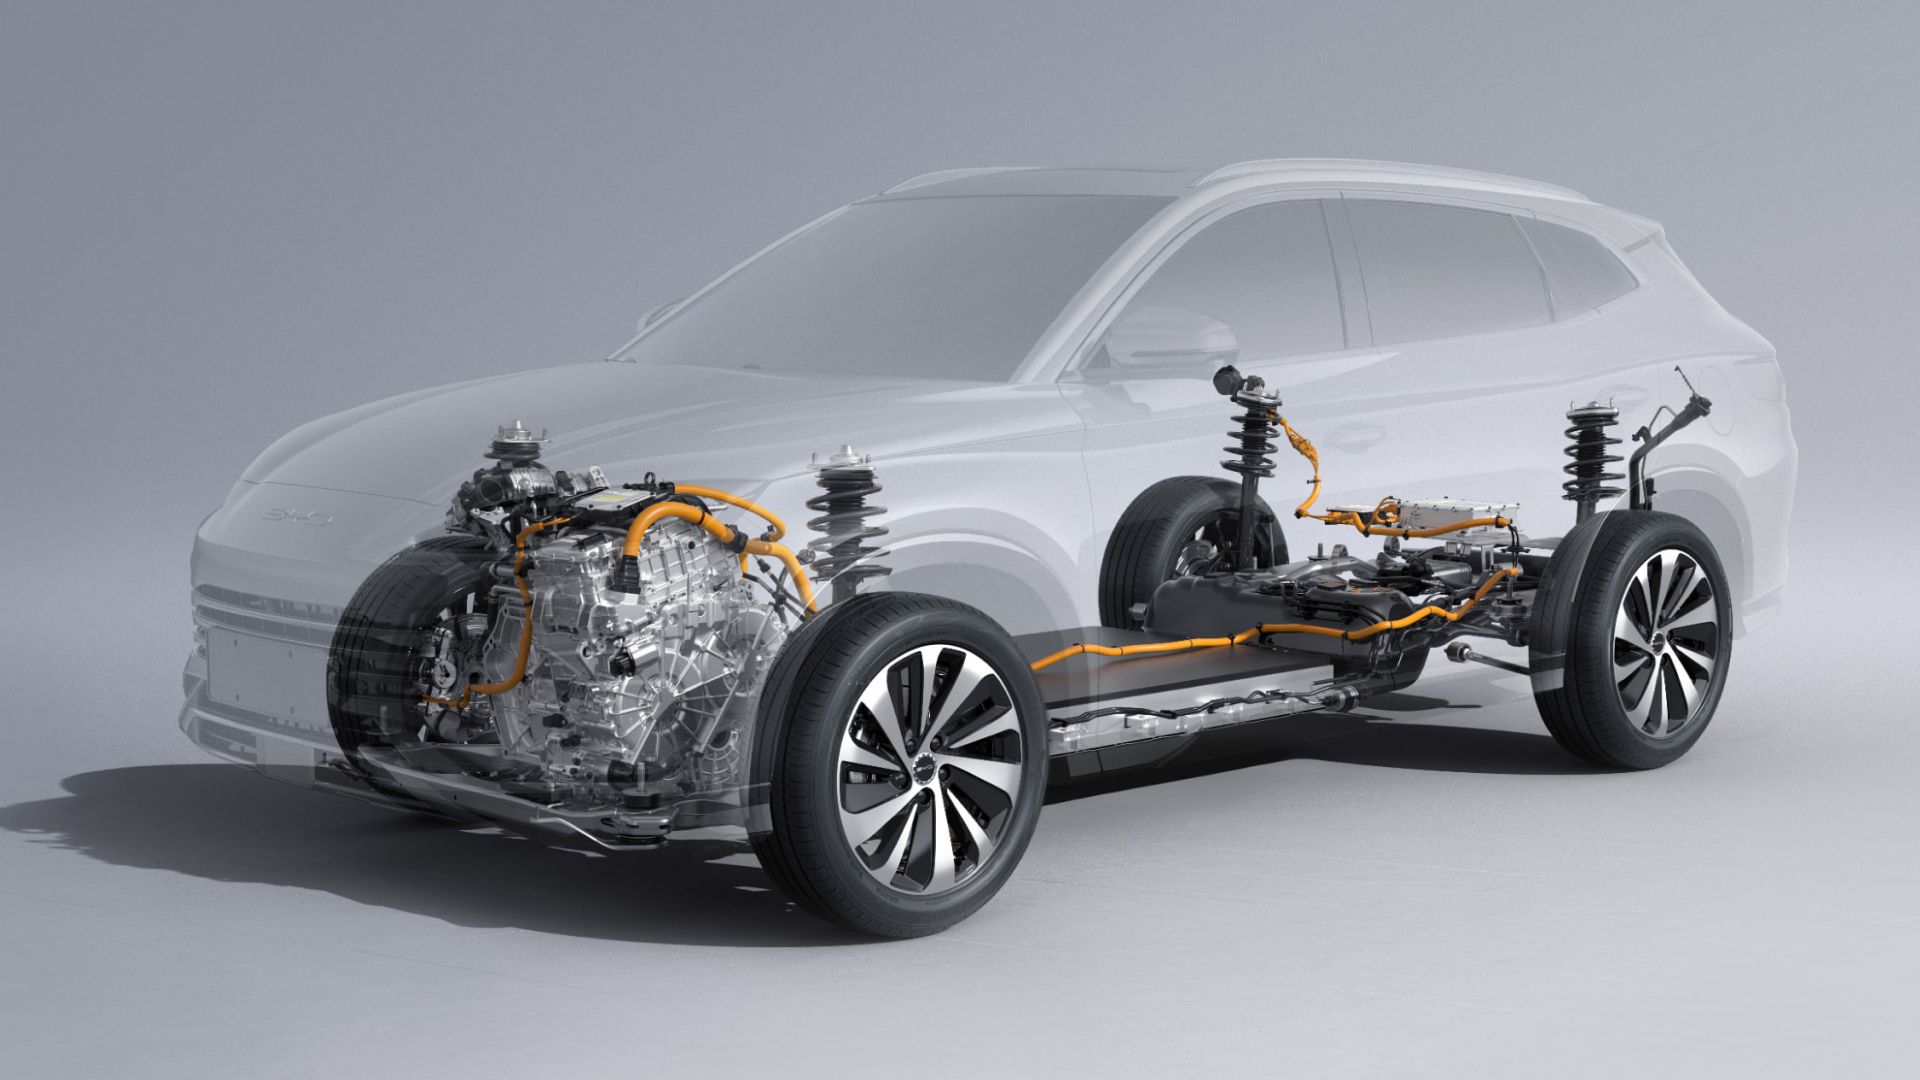 BYD unveils new hybrid tech with a record low fuel consumption (Source: BYD)